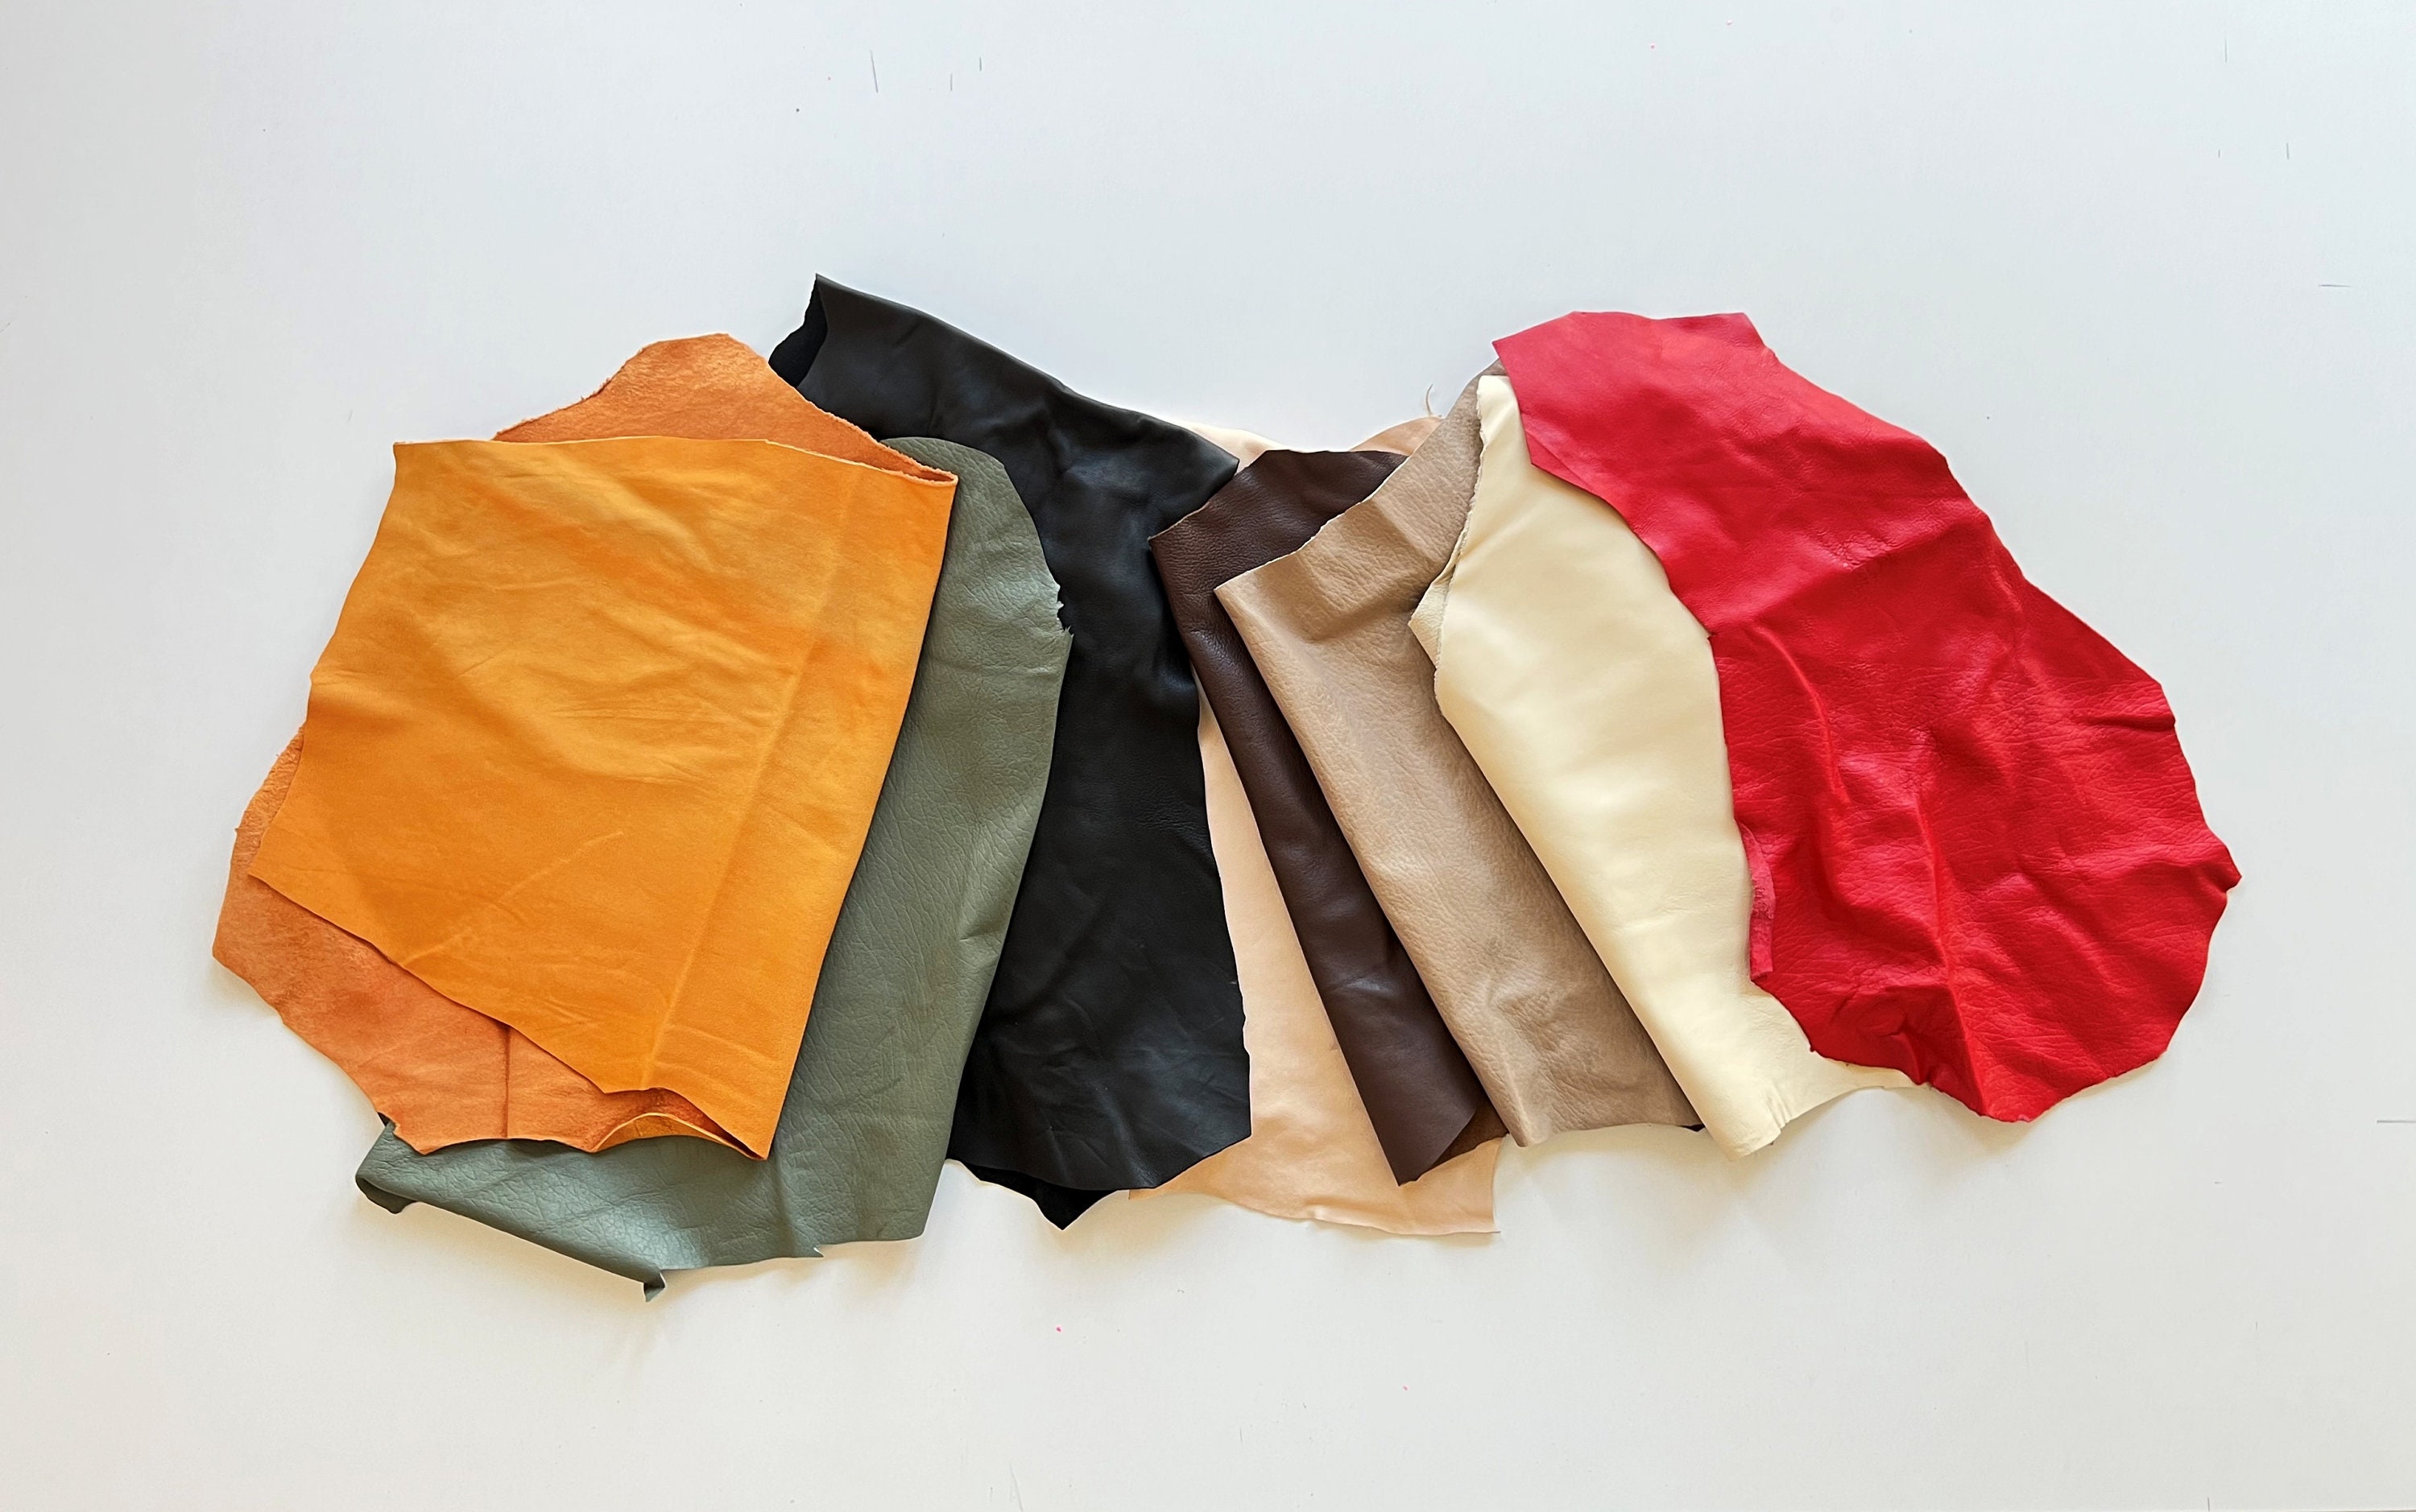  Large Leather Remnants - 2 lbs. (2-3 Pieces per Pack). Colors  are Different in Each Pack